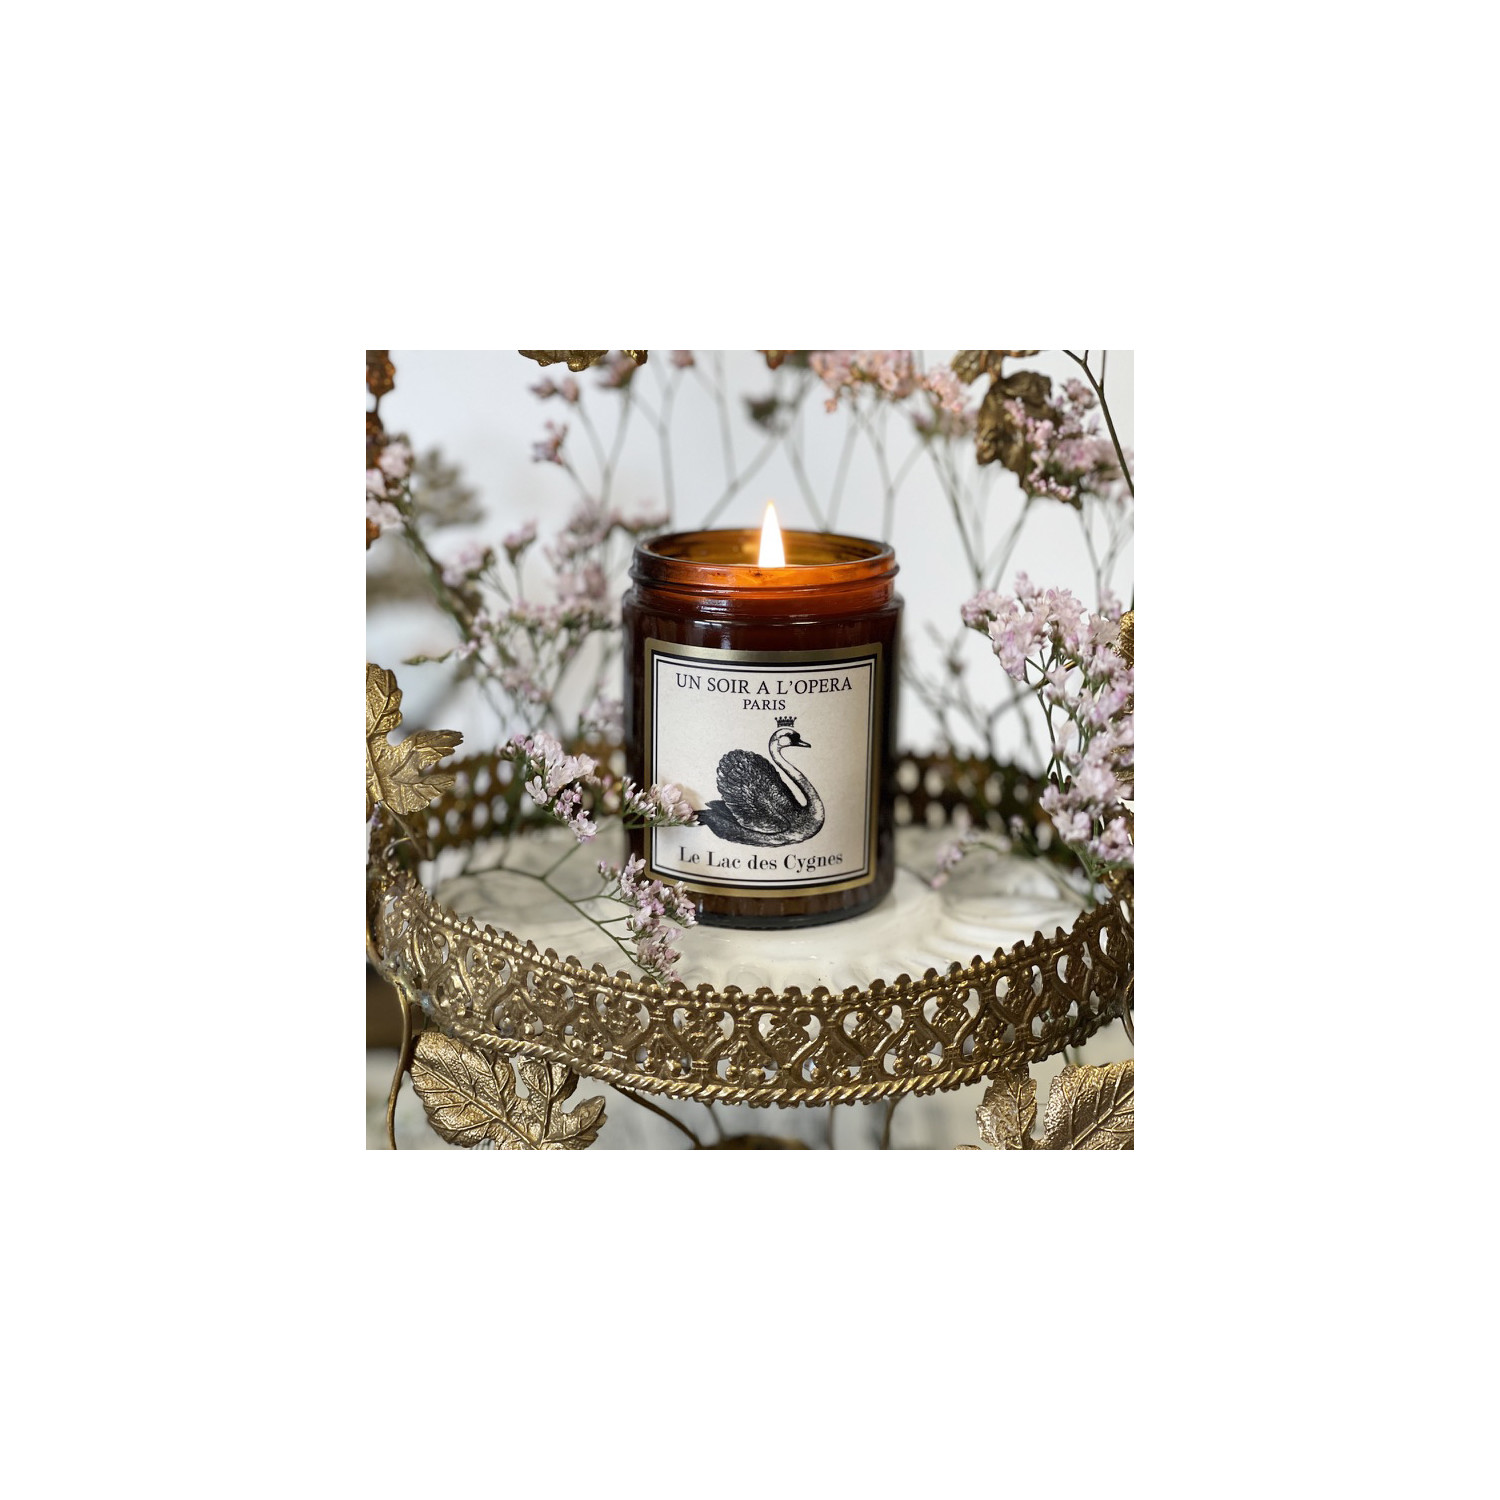 THE SWAN LAKE - Scented candle white glass - White flowers - 6 units minimum